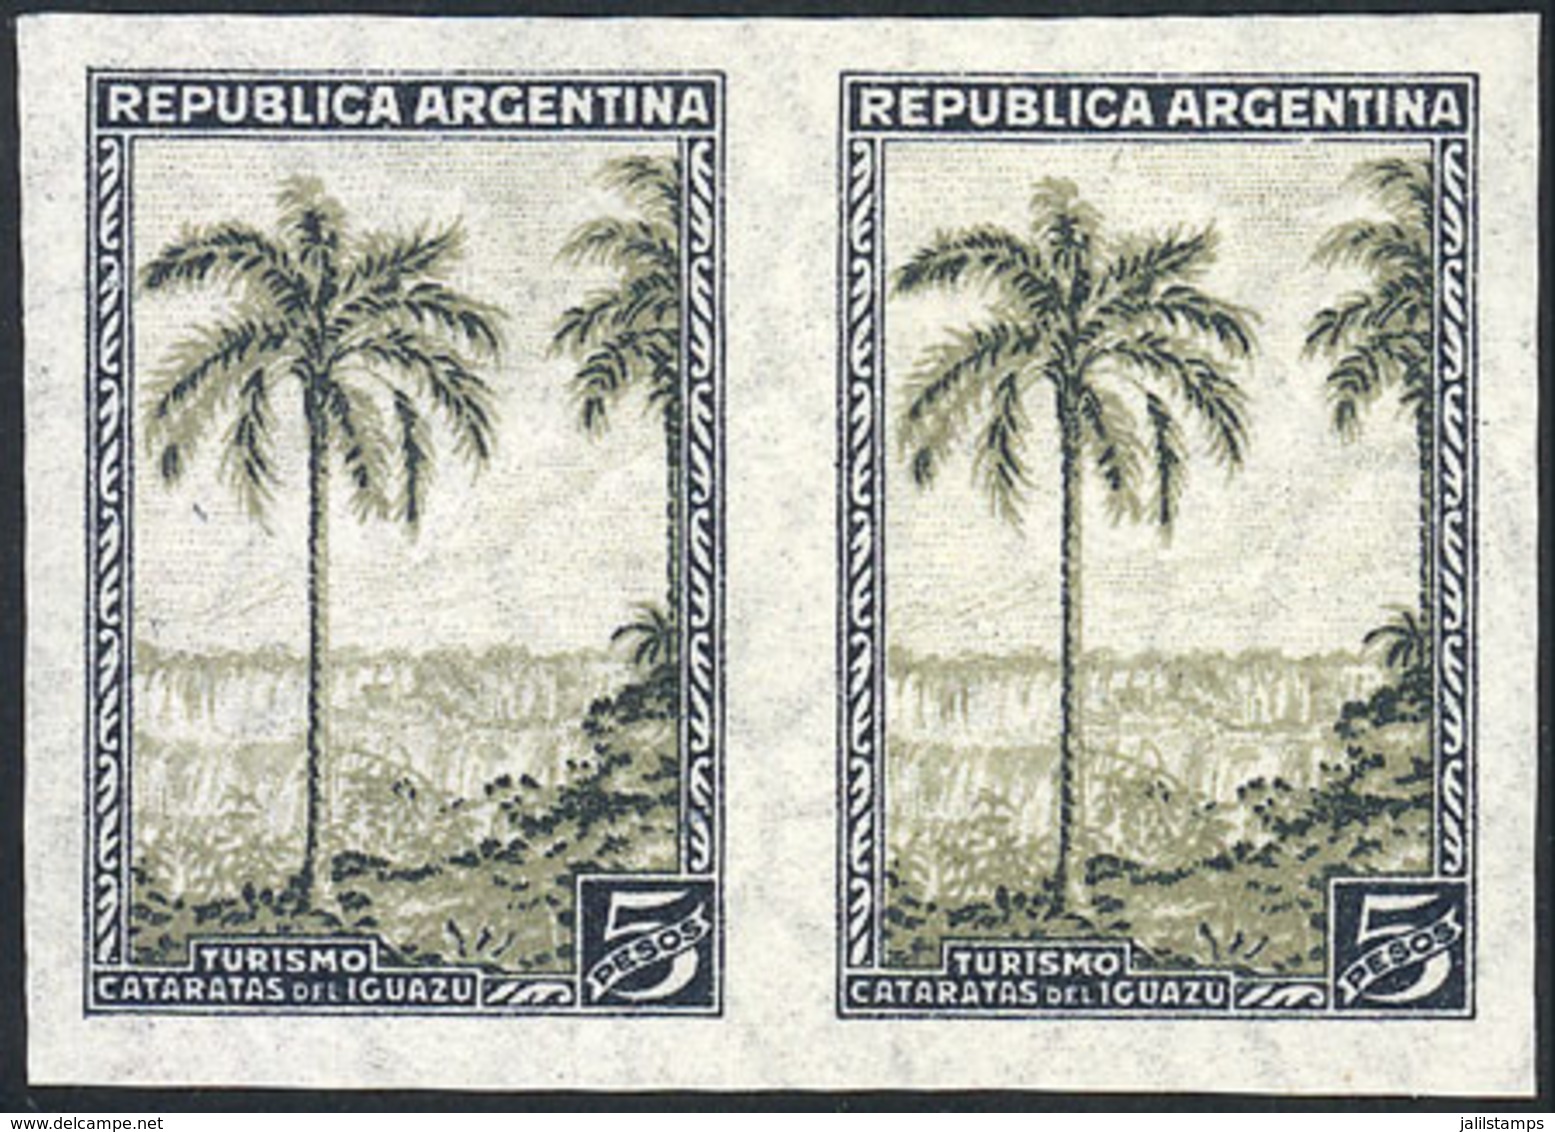 ARGENTINA: GJ.793P, 5P. Iguazú Falls, Watermark Sun With Straight Rays, IMPERFORATE PAIR, MNH (+30%), Excellent Quality! - Covers & Documents